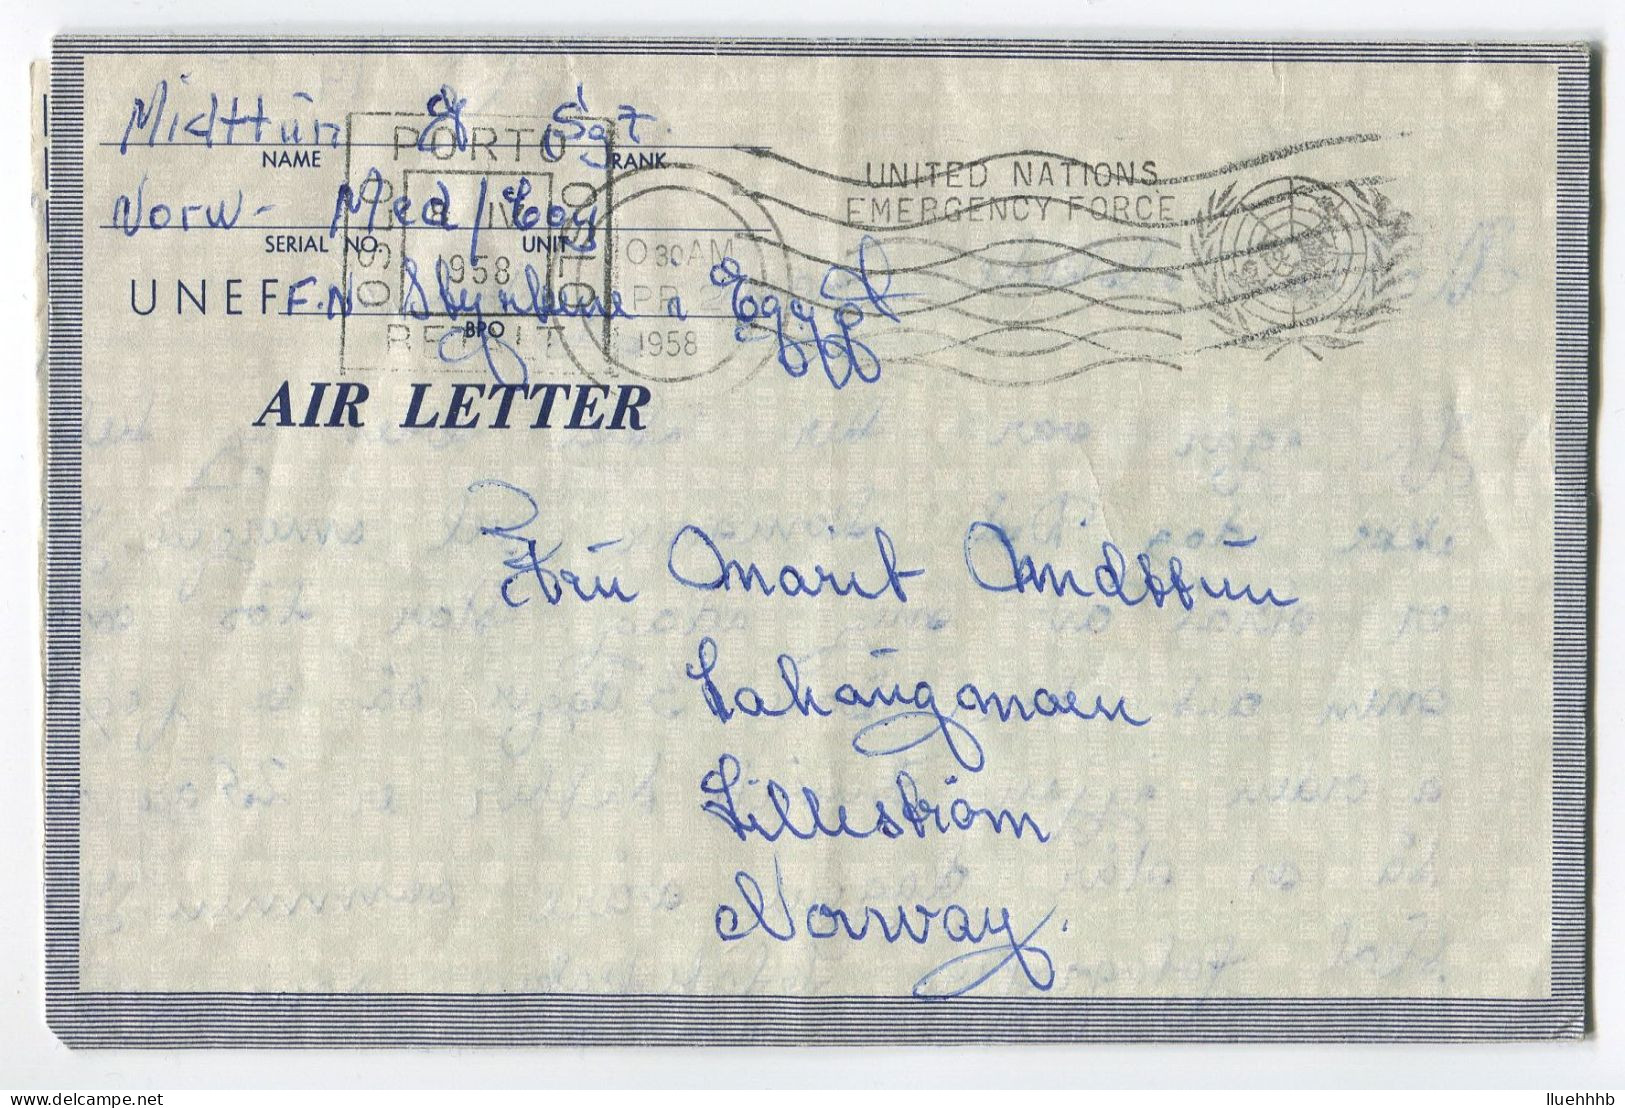 UNITED NATIONS: 1958 Free Aerogramme From Norway Emergency Forces In Suez - Airmail